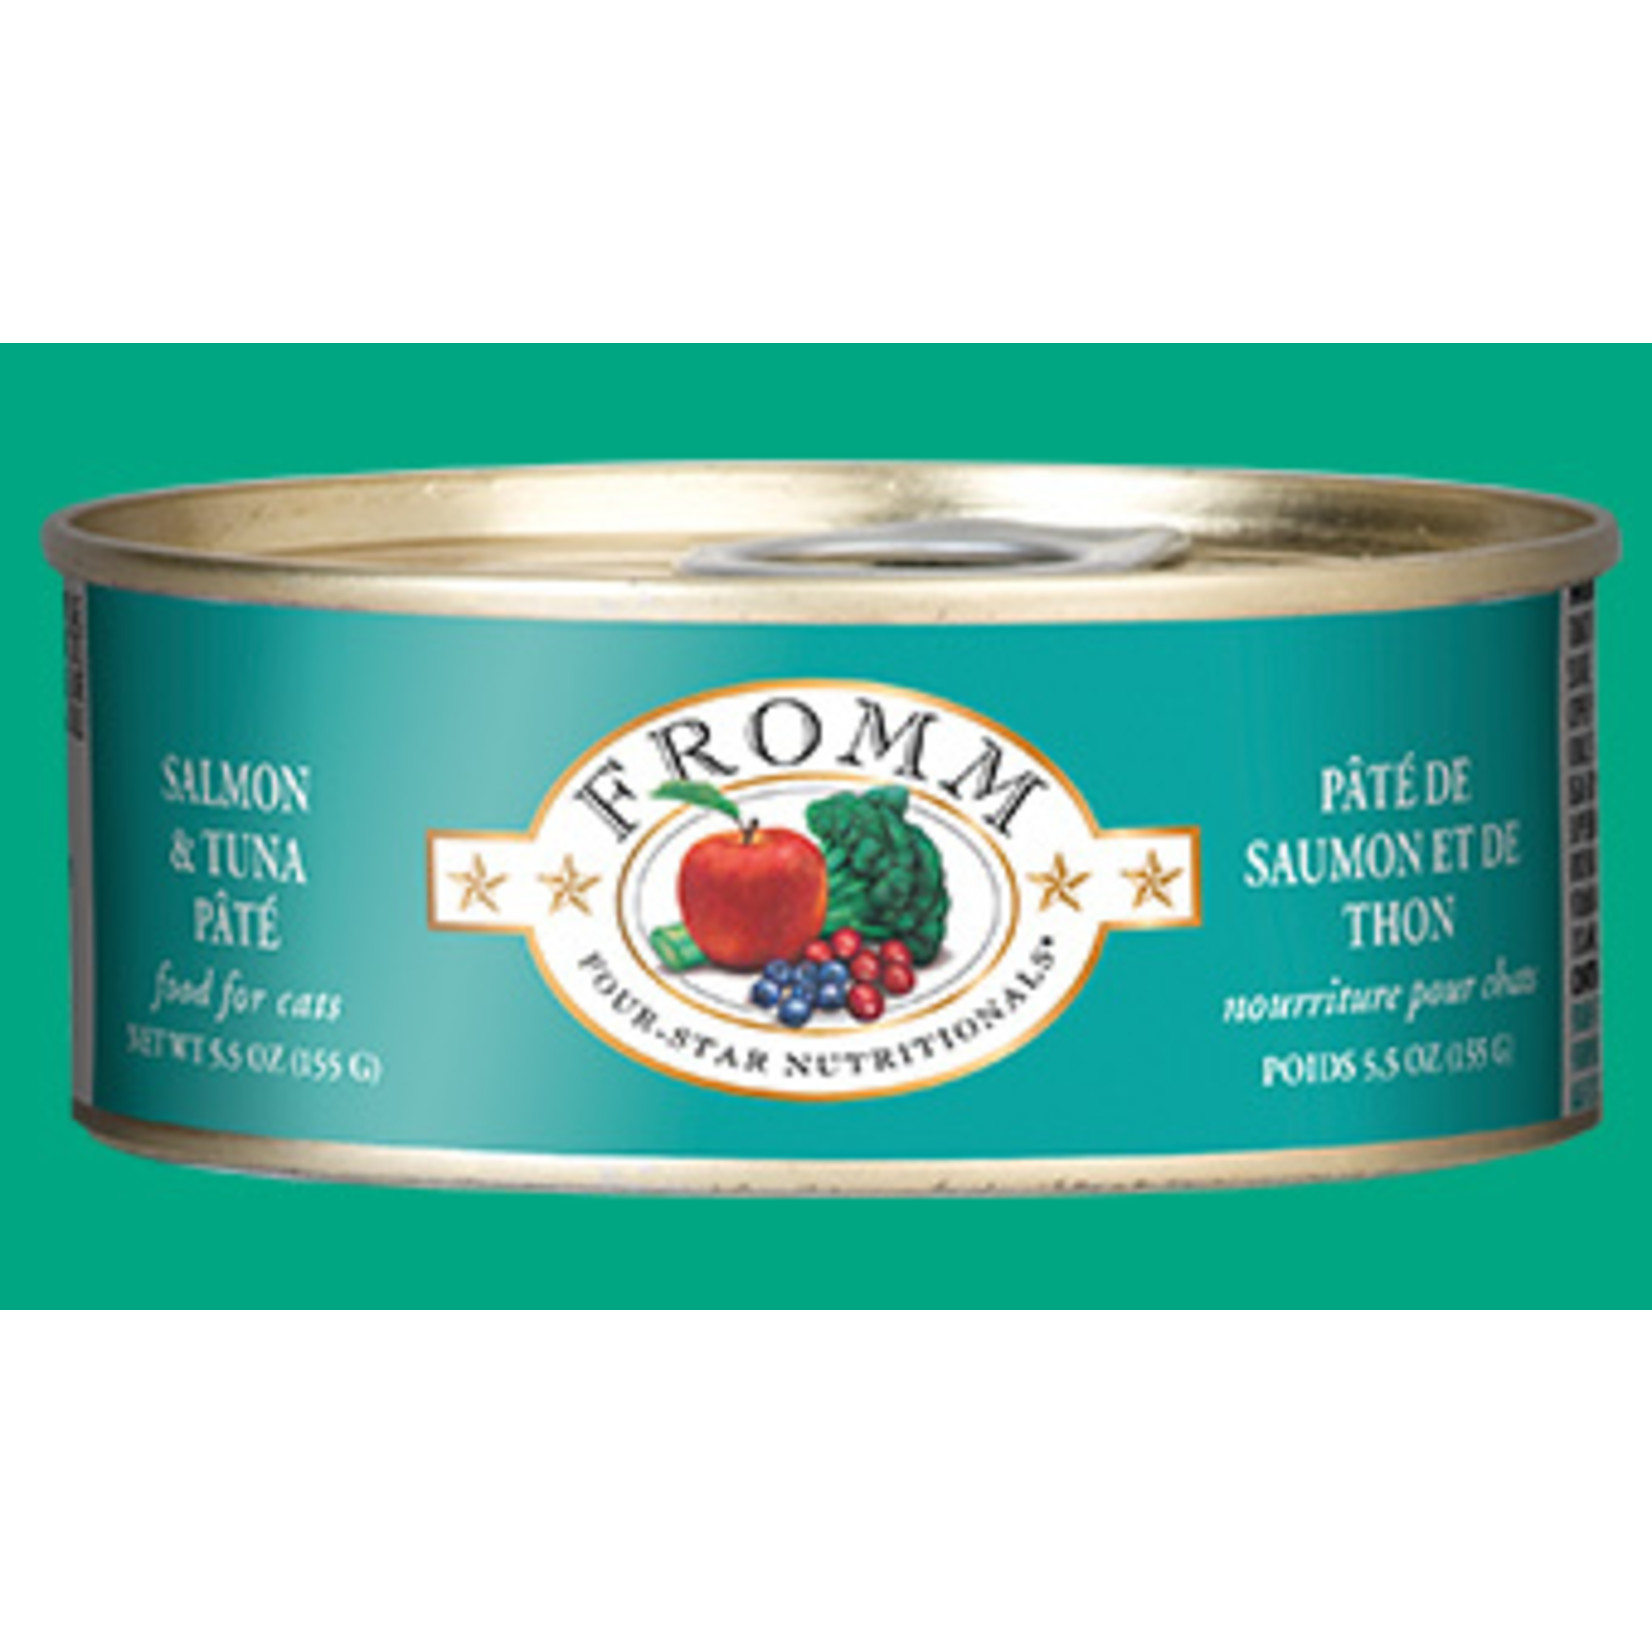 Fromm Fromm Wet Cat Food Four Star Nutritionals Salmon & Tuna Pate 5.5oz Can Grain Free